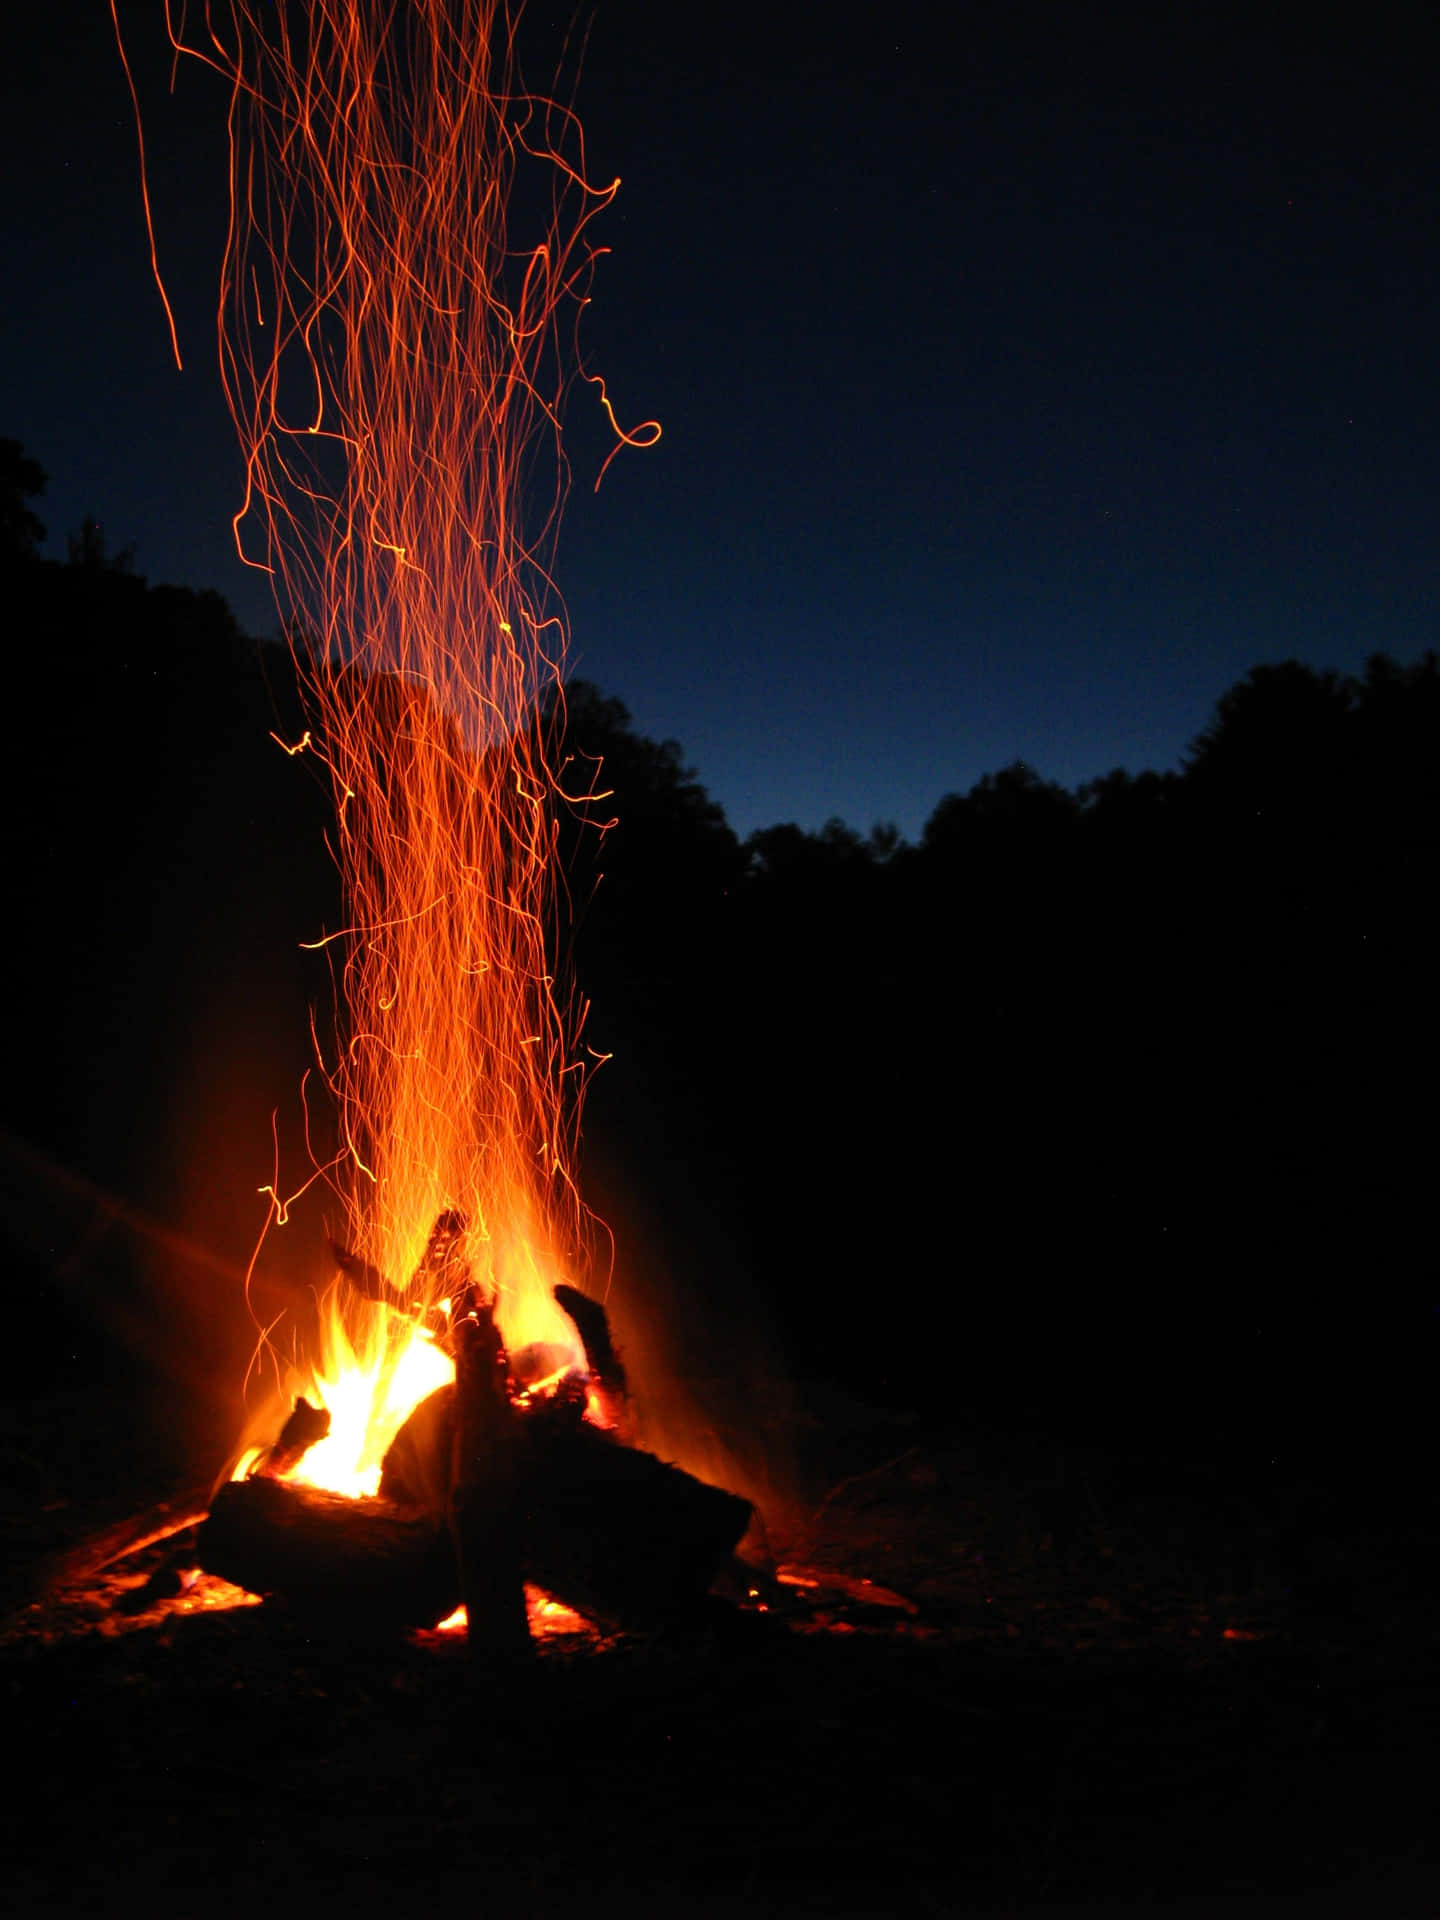 Soak in the sights and tranquility of a cozy bonfire.